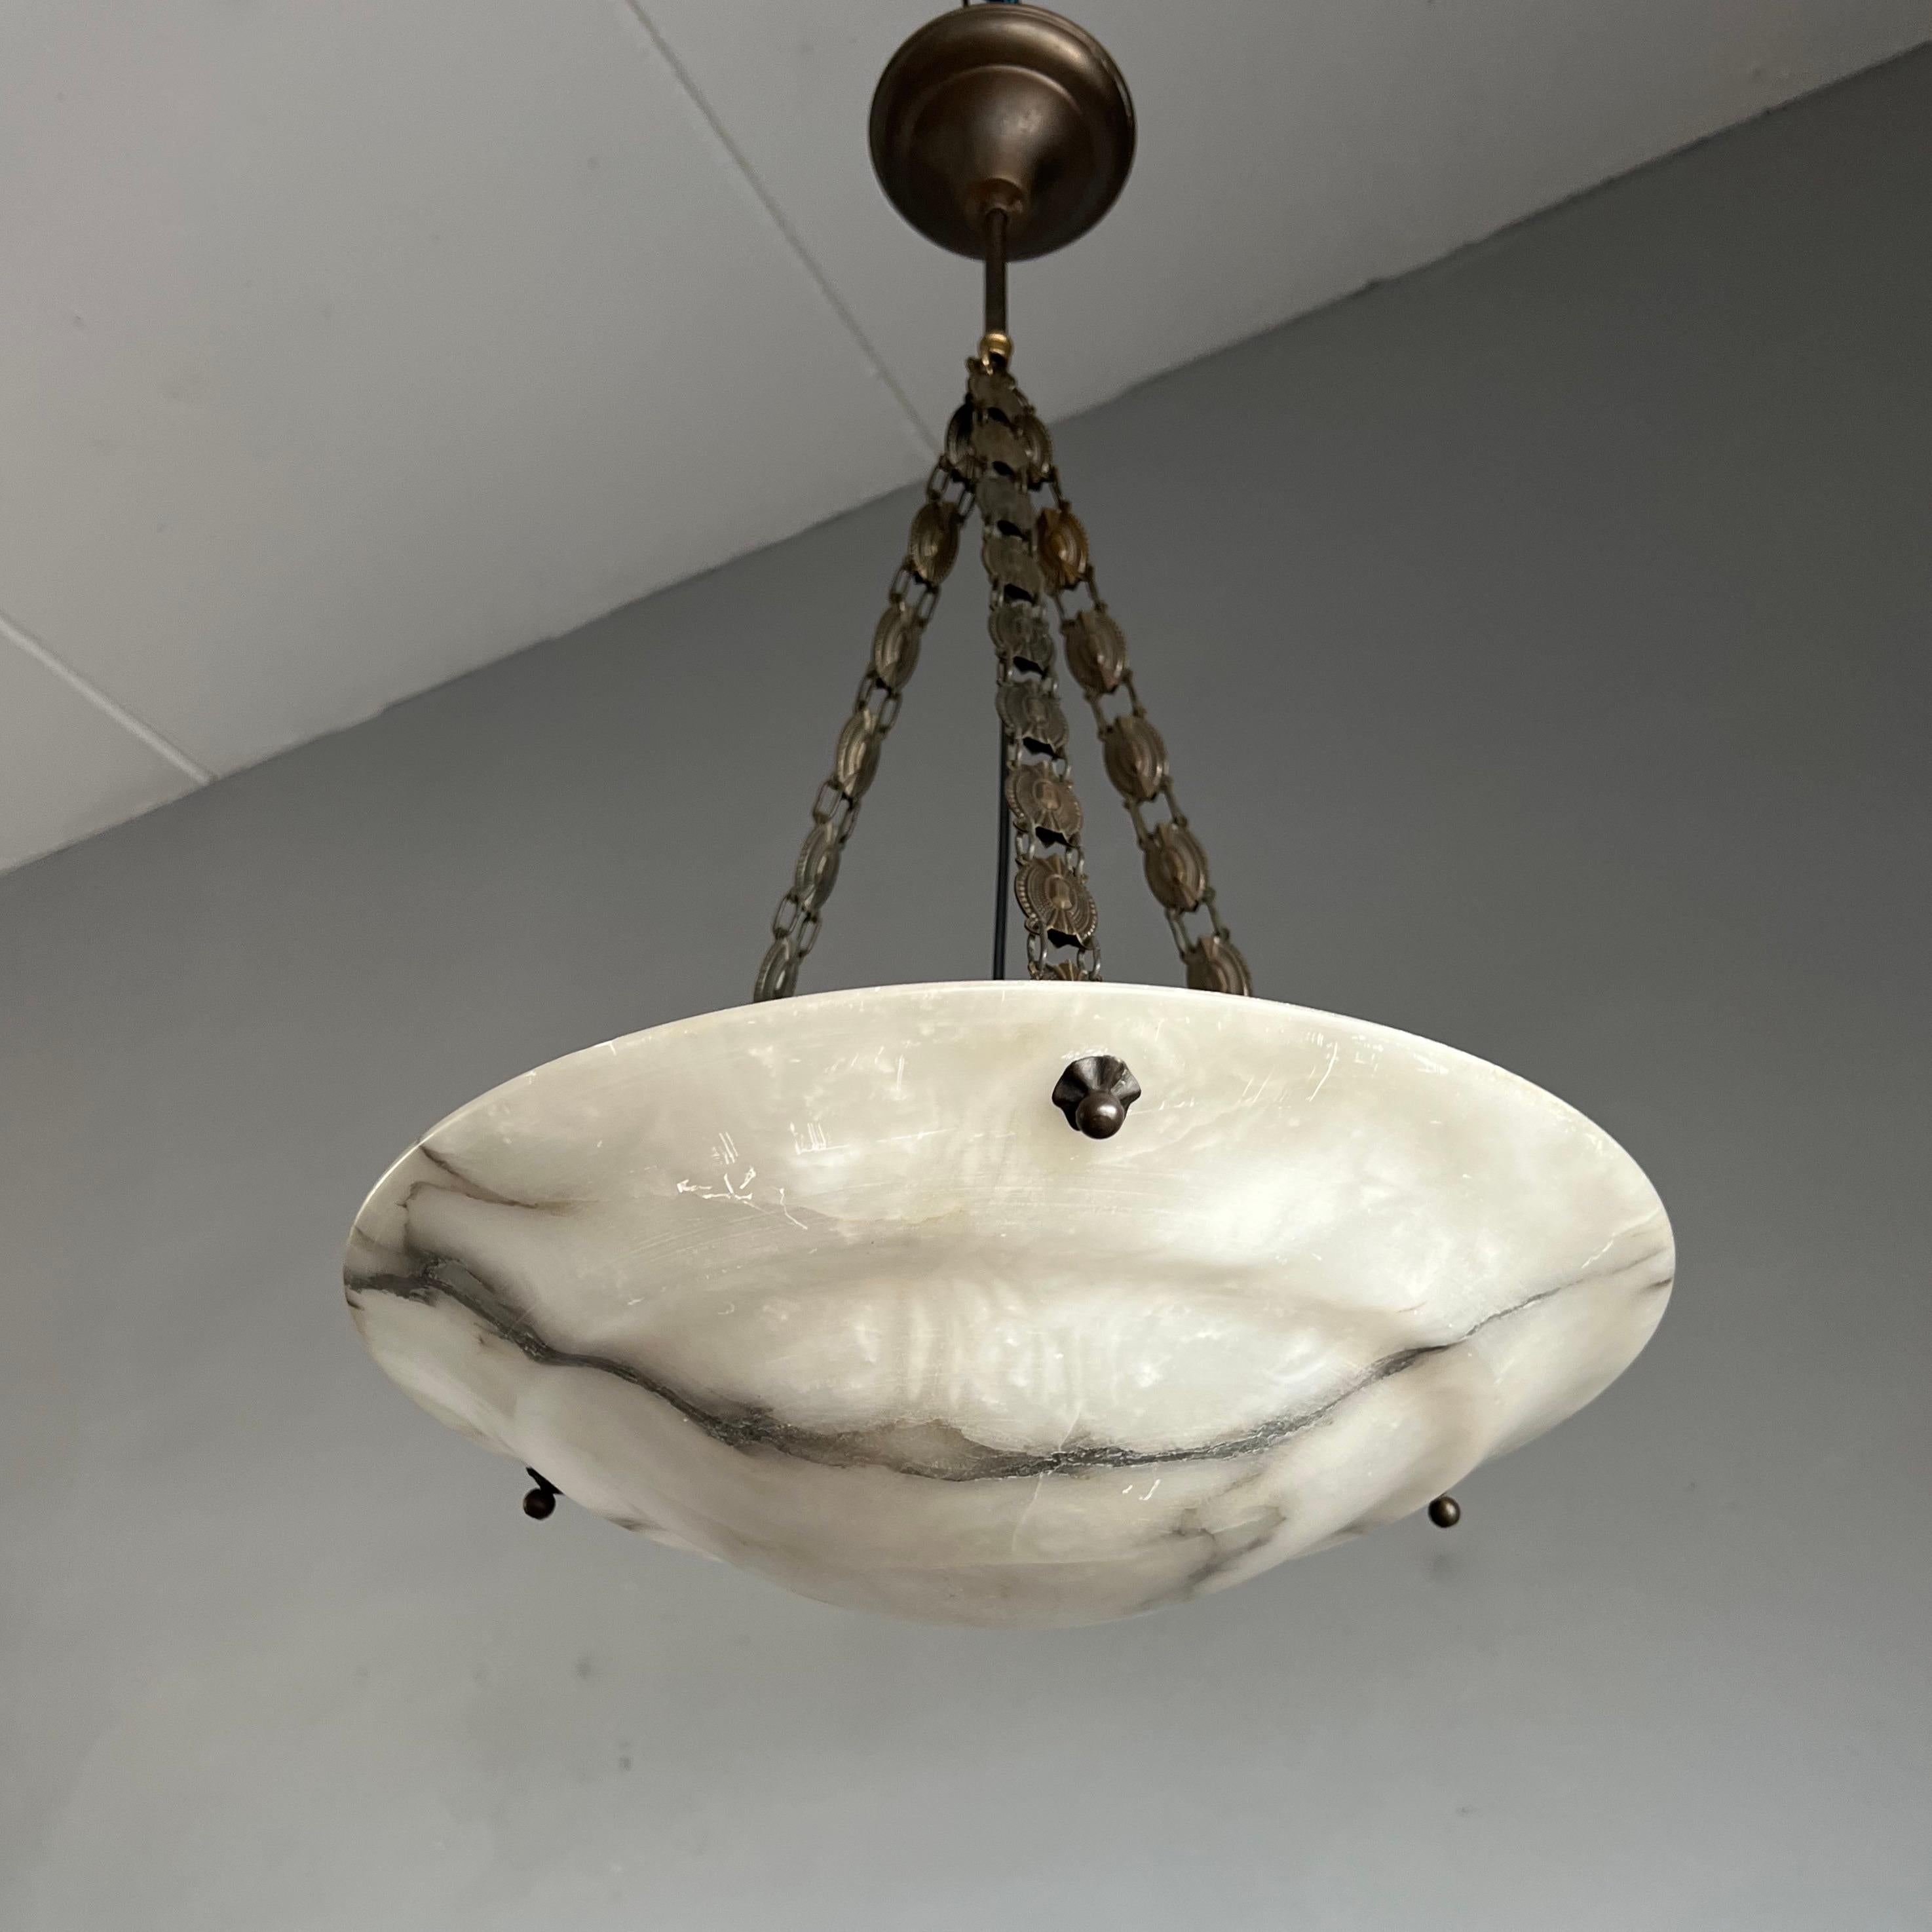 Good size and great design alabaster pendant from the European Art Deco era.

This rare shape and ideal size Art Deco light fixture comes with a stunning and good condition, polished alabaster shade. Both on and off this striking shade with its